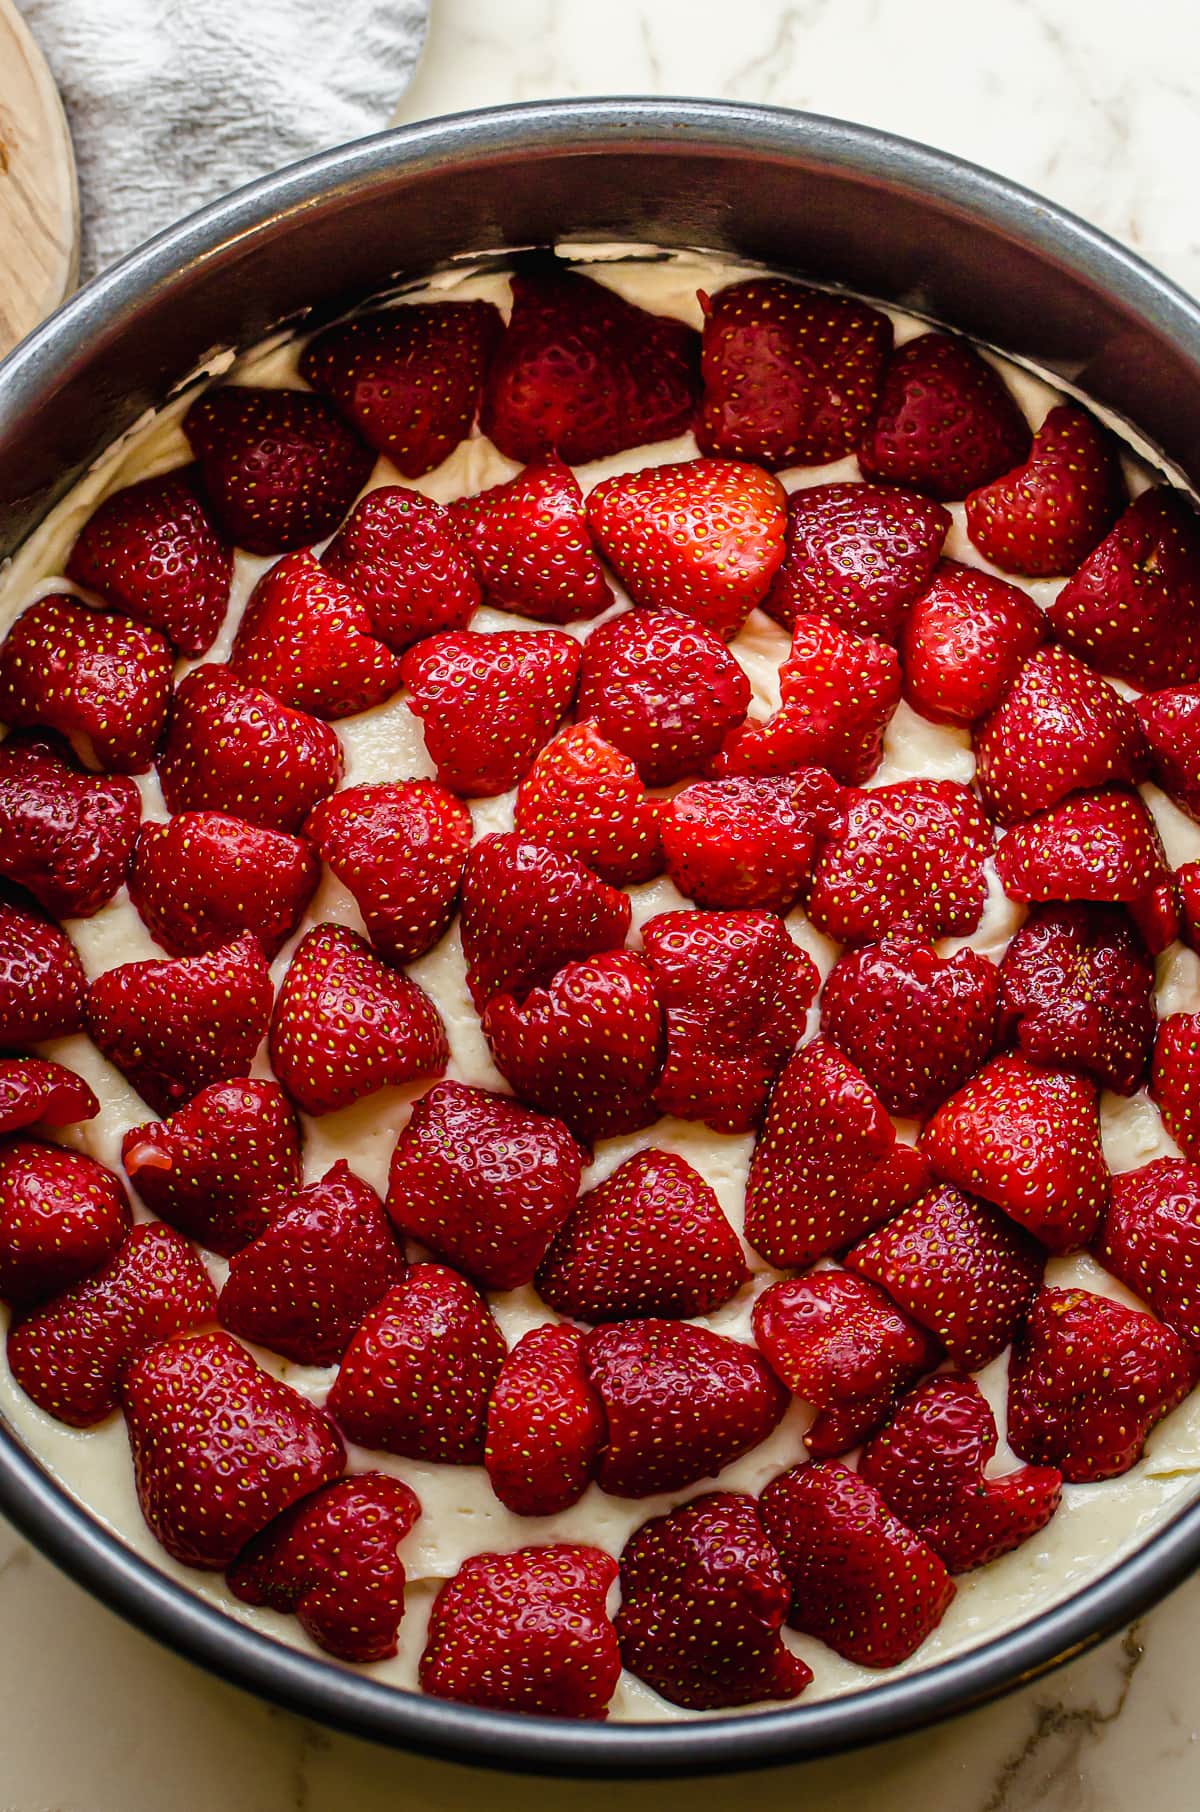 An unbaked pan of cake batter topped with fresh strawberries in a circular patterns.